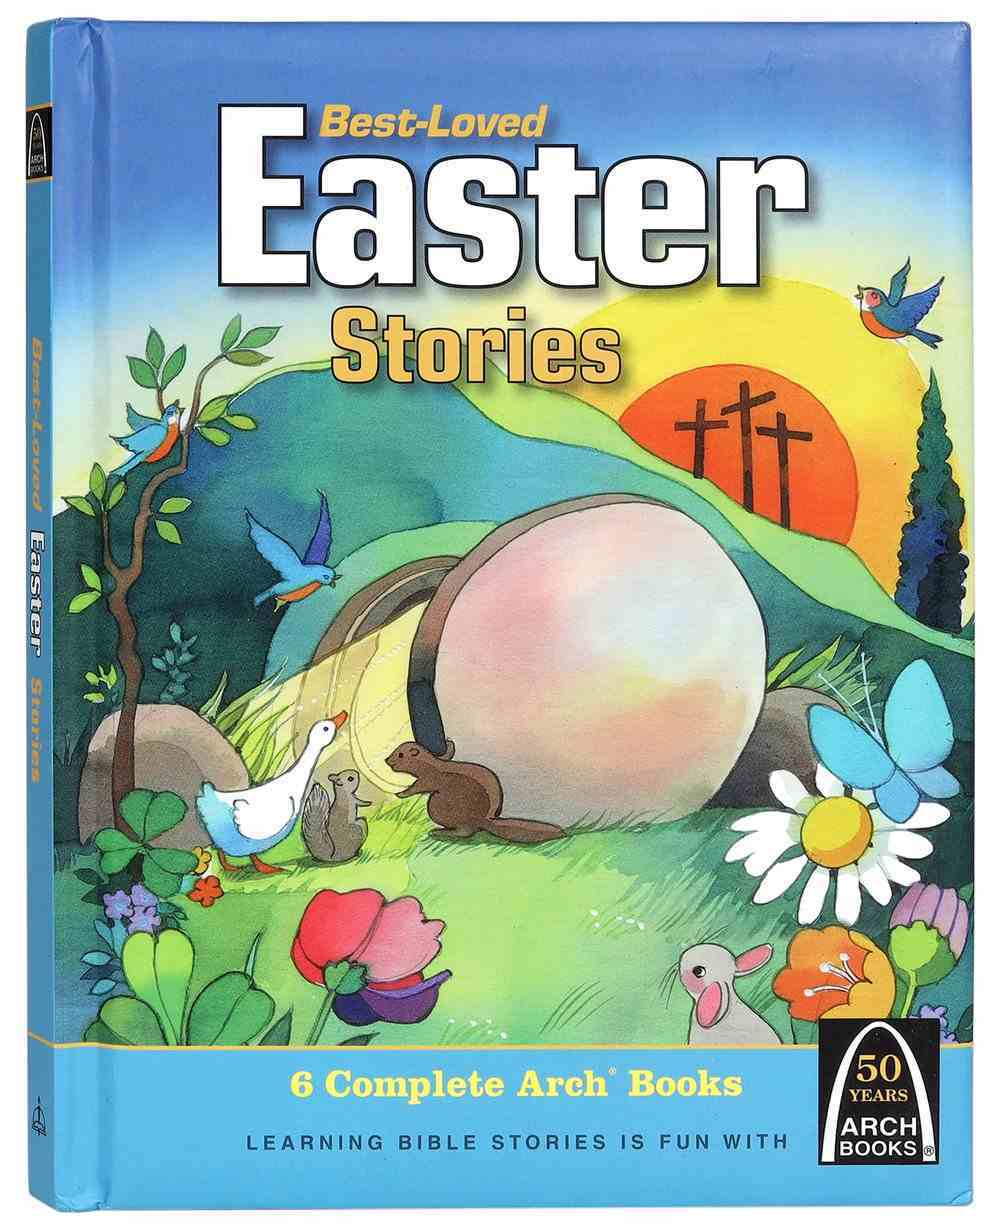 Best-Loved Easter Stories (Arch Books Series) Padded Hardback